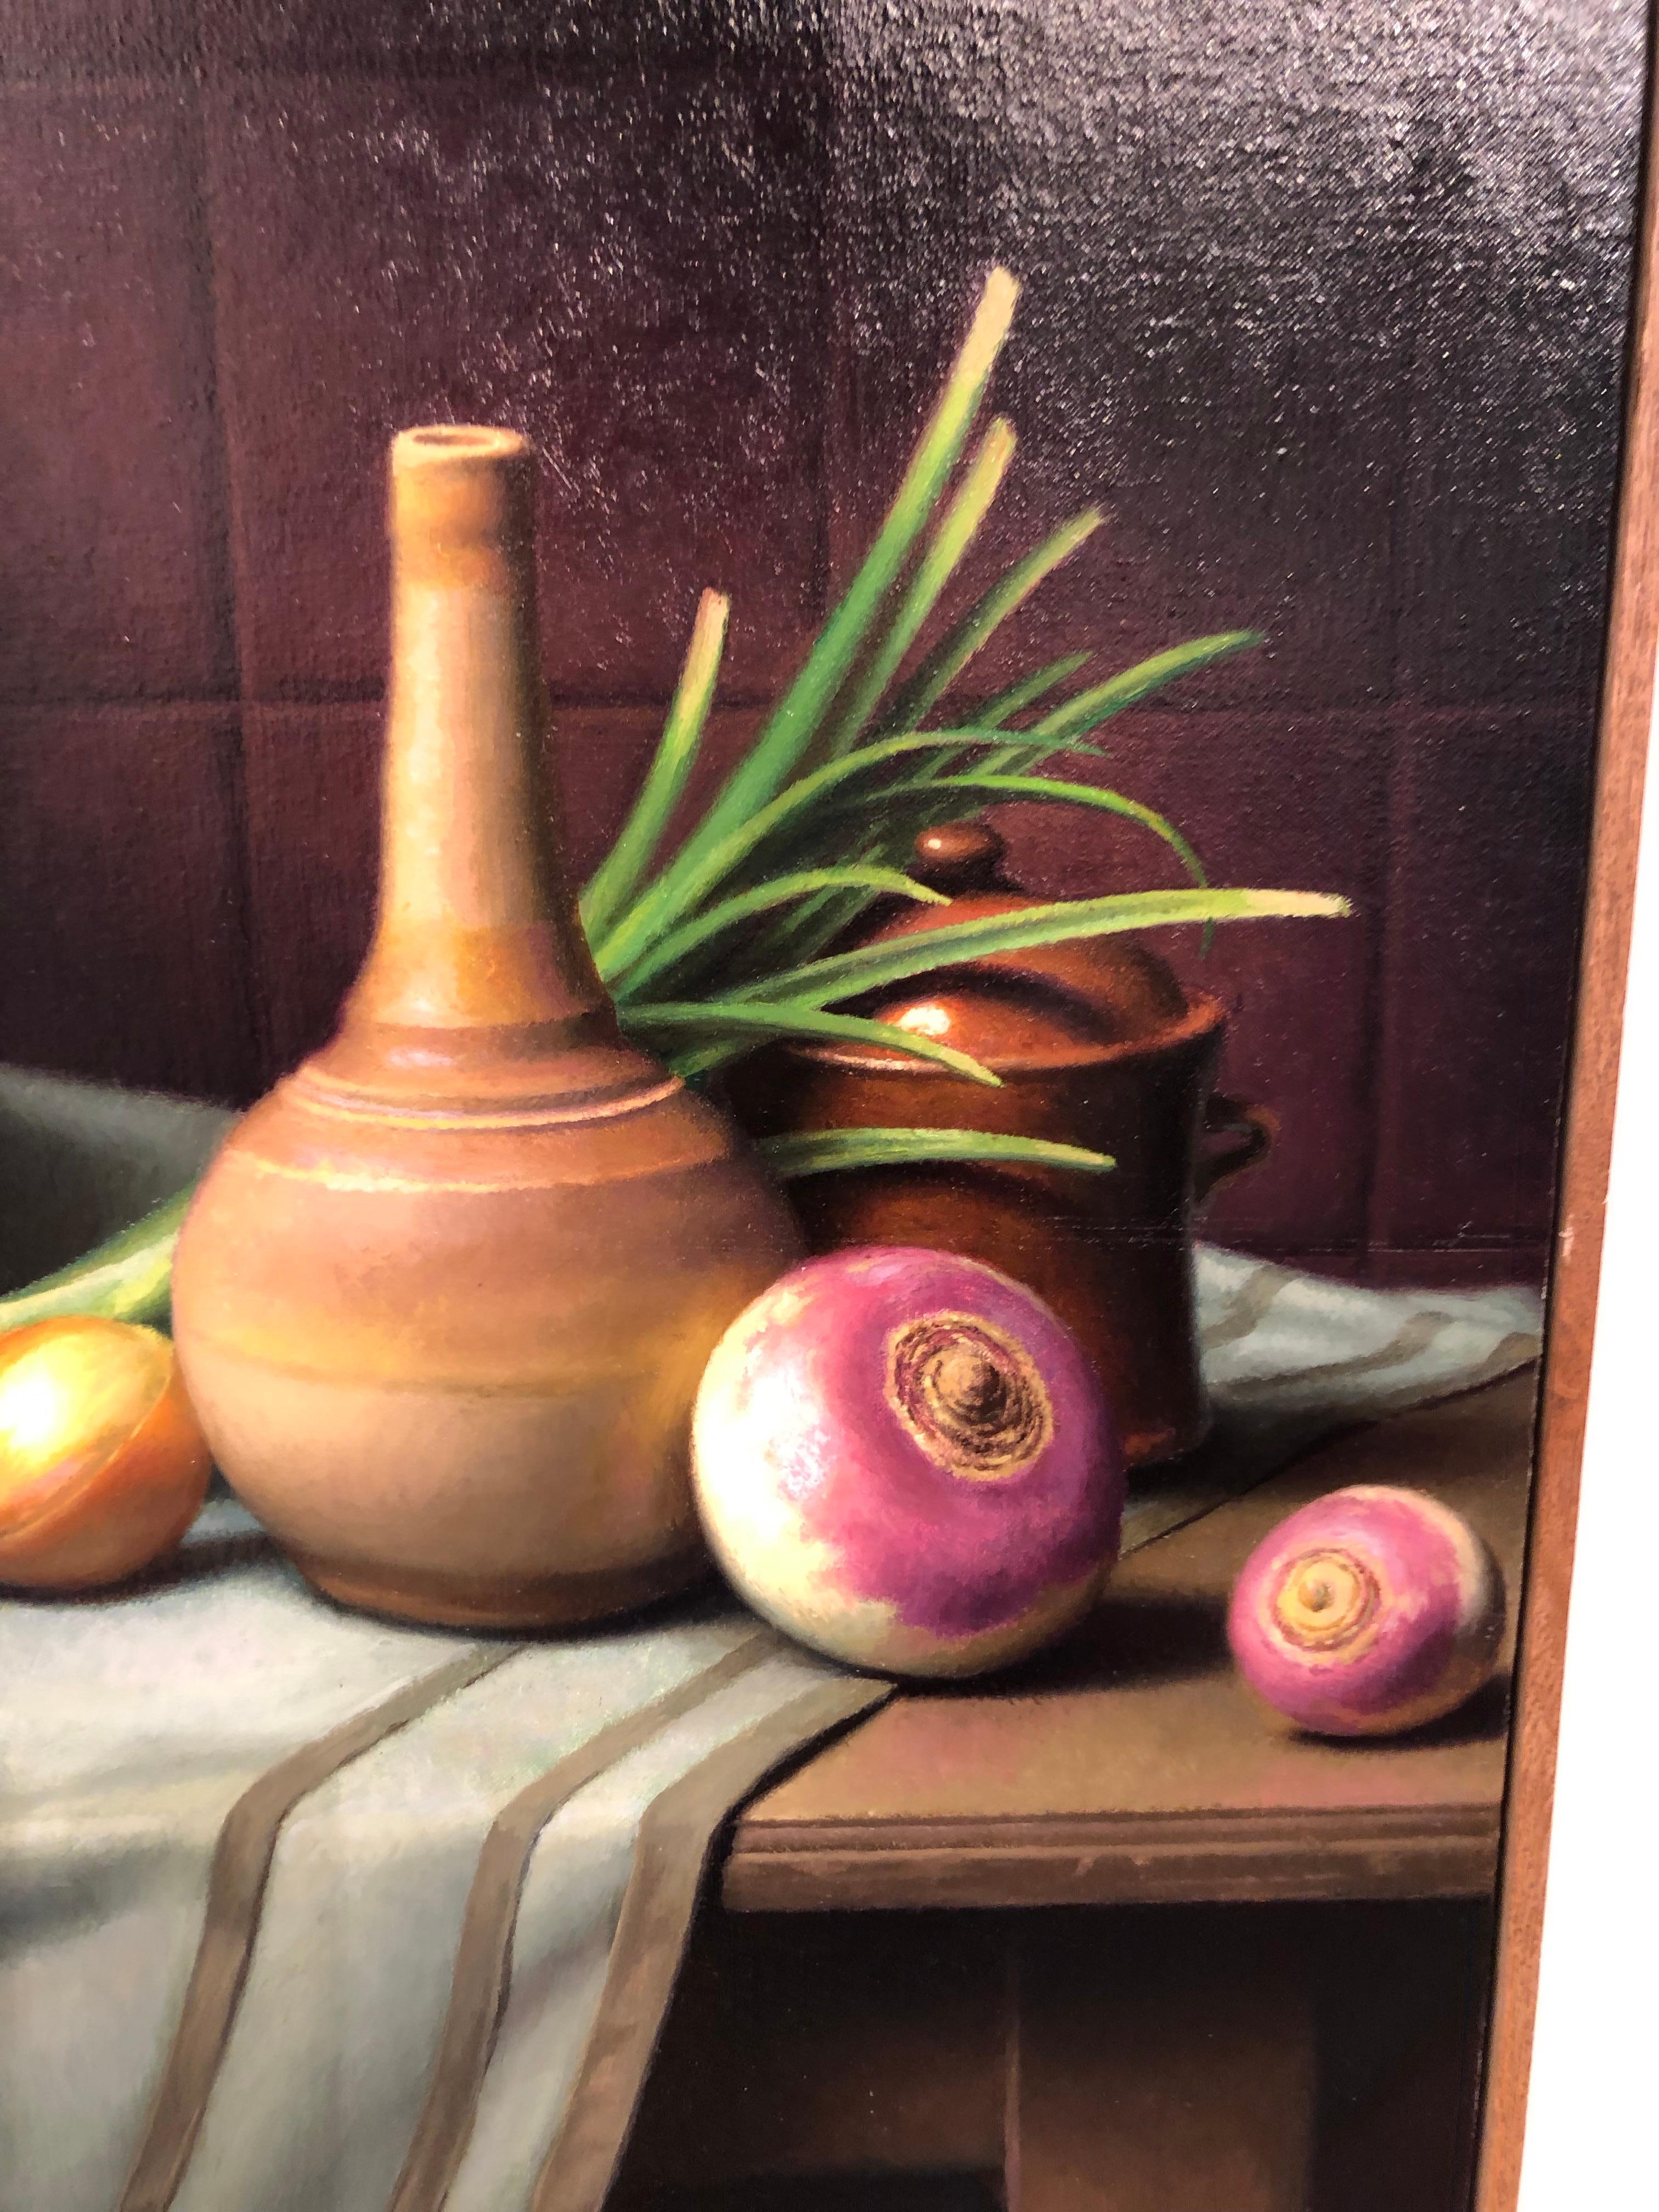 Still Life with Turnips, Original Oil Painting on Canvas by Michael Chelich (amerikanisch)